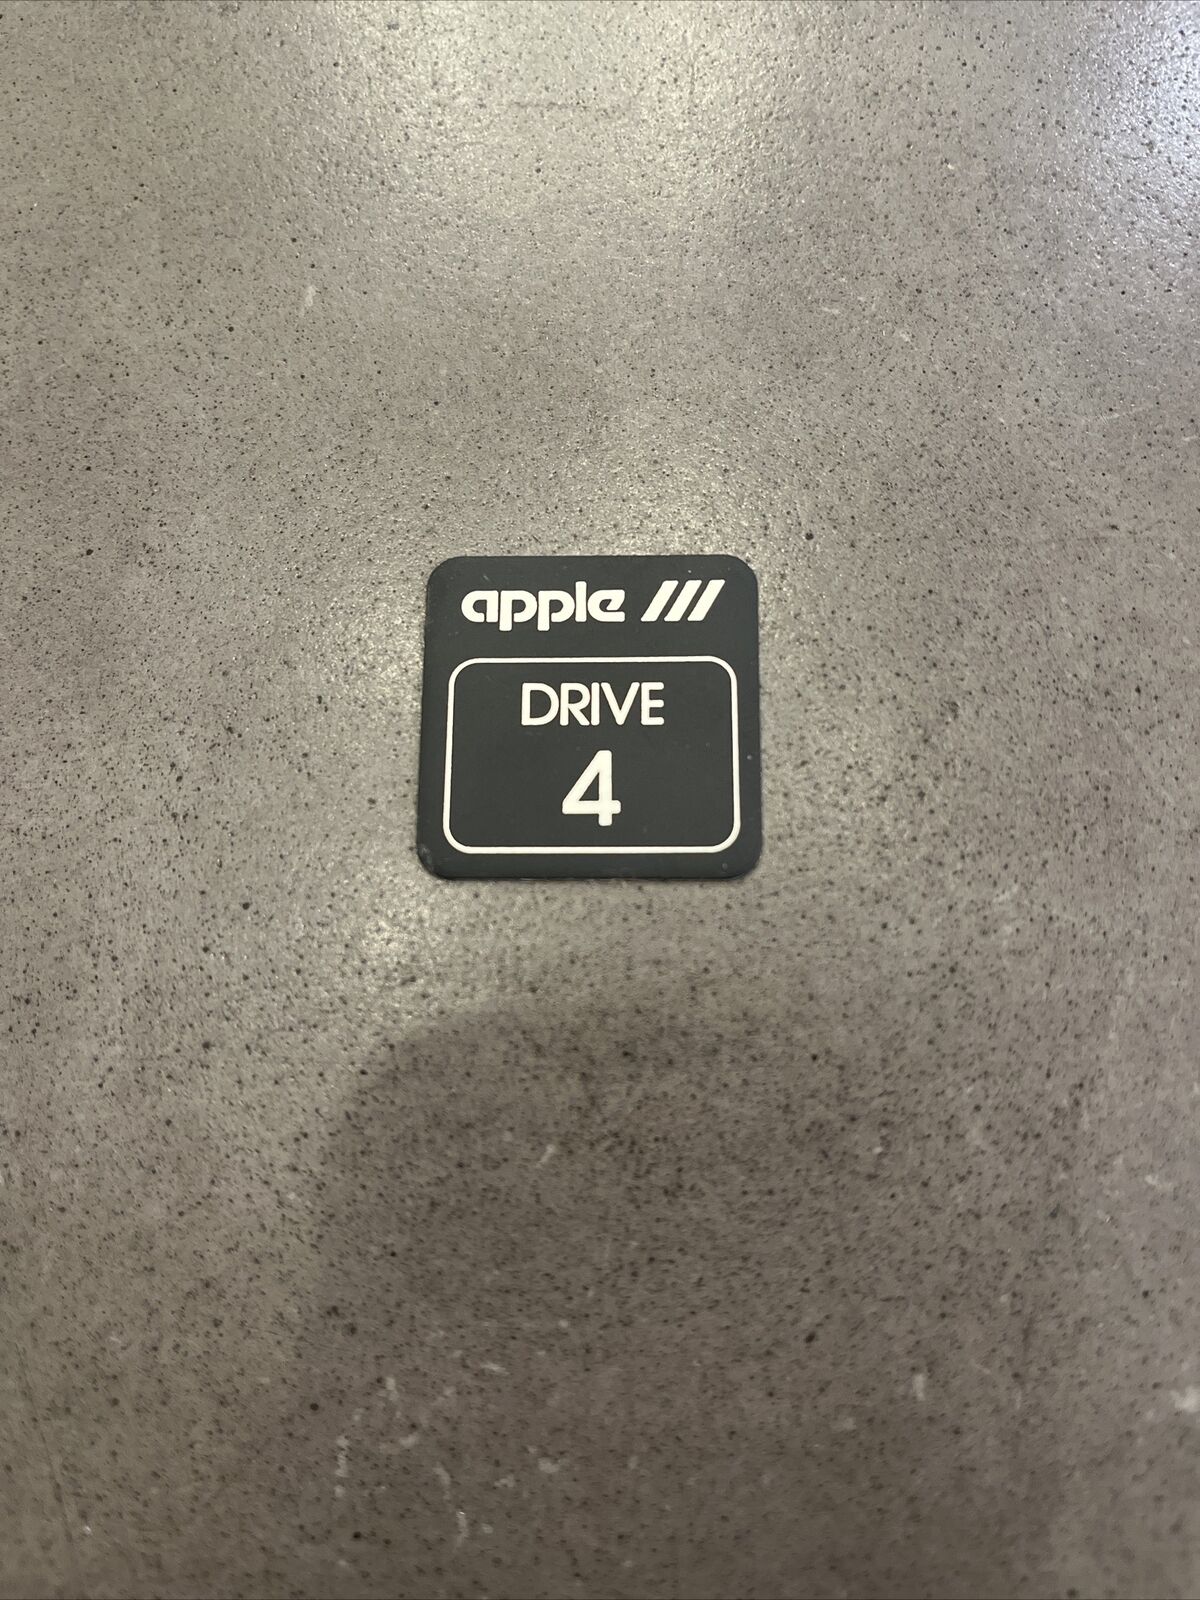 Apple III Drive 4 Logo Decal Sticker - New For Apple 3